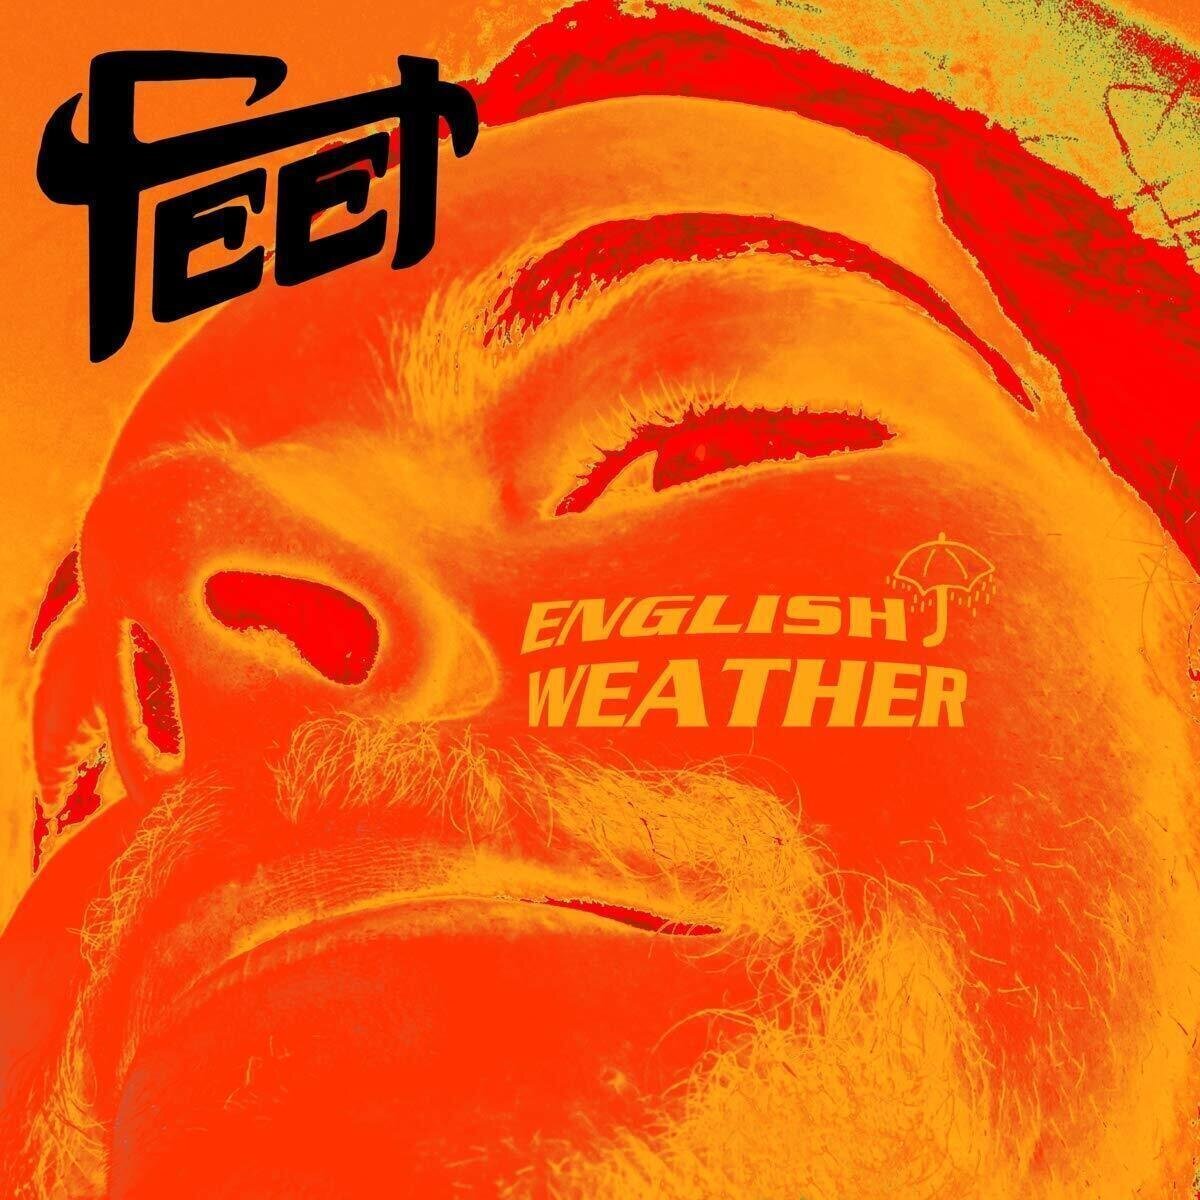 LP Feet - English Weather (Picture Disc) (LP)